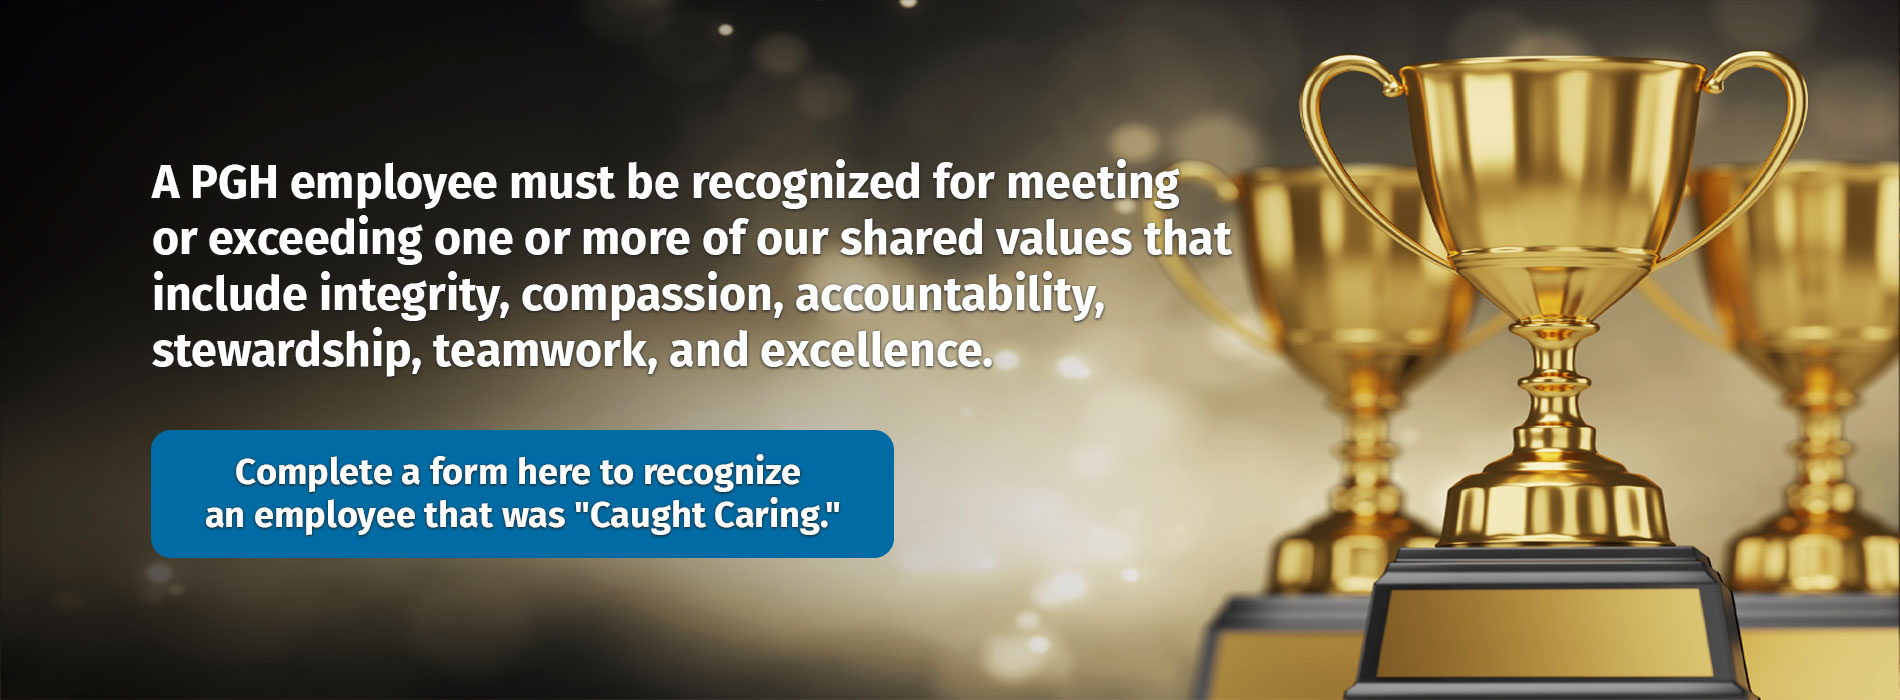 Banner picture of three trophies. Banner says:

A PGH employee must be recognized for meeting or exceeding one or more of our shared values that include integrity, compassion, accountability,stewardship, teamwork, and excellence.

Complete a form here to recognize an employee that was "Caught Caring".